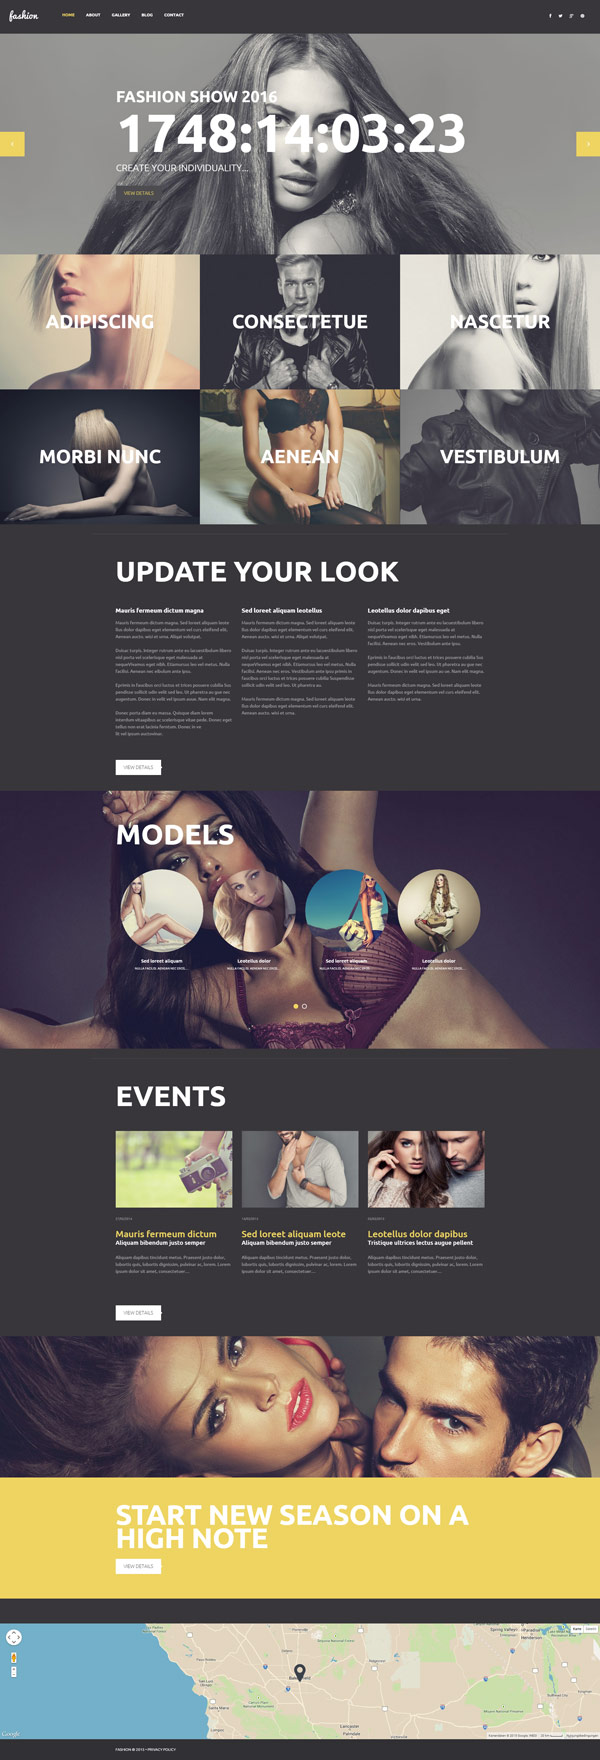 The Fashion Icon WordPress Theme with a 100 % responsive design is intended for businesses related to beauty and style. This is a first class fashion WordPress theme for professional requirements.